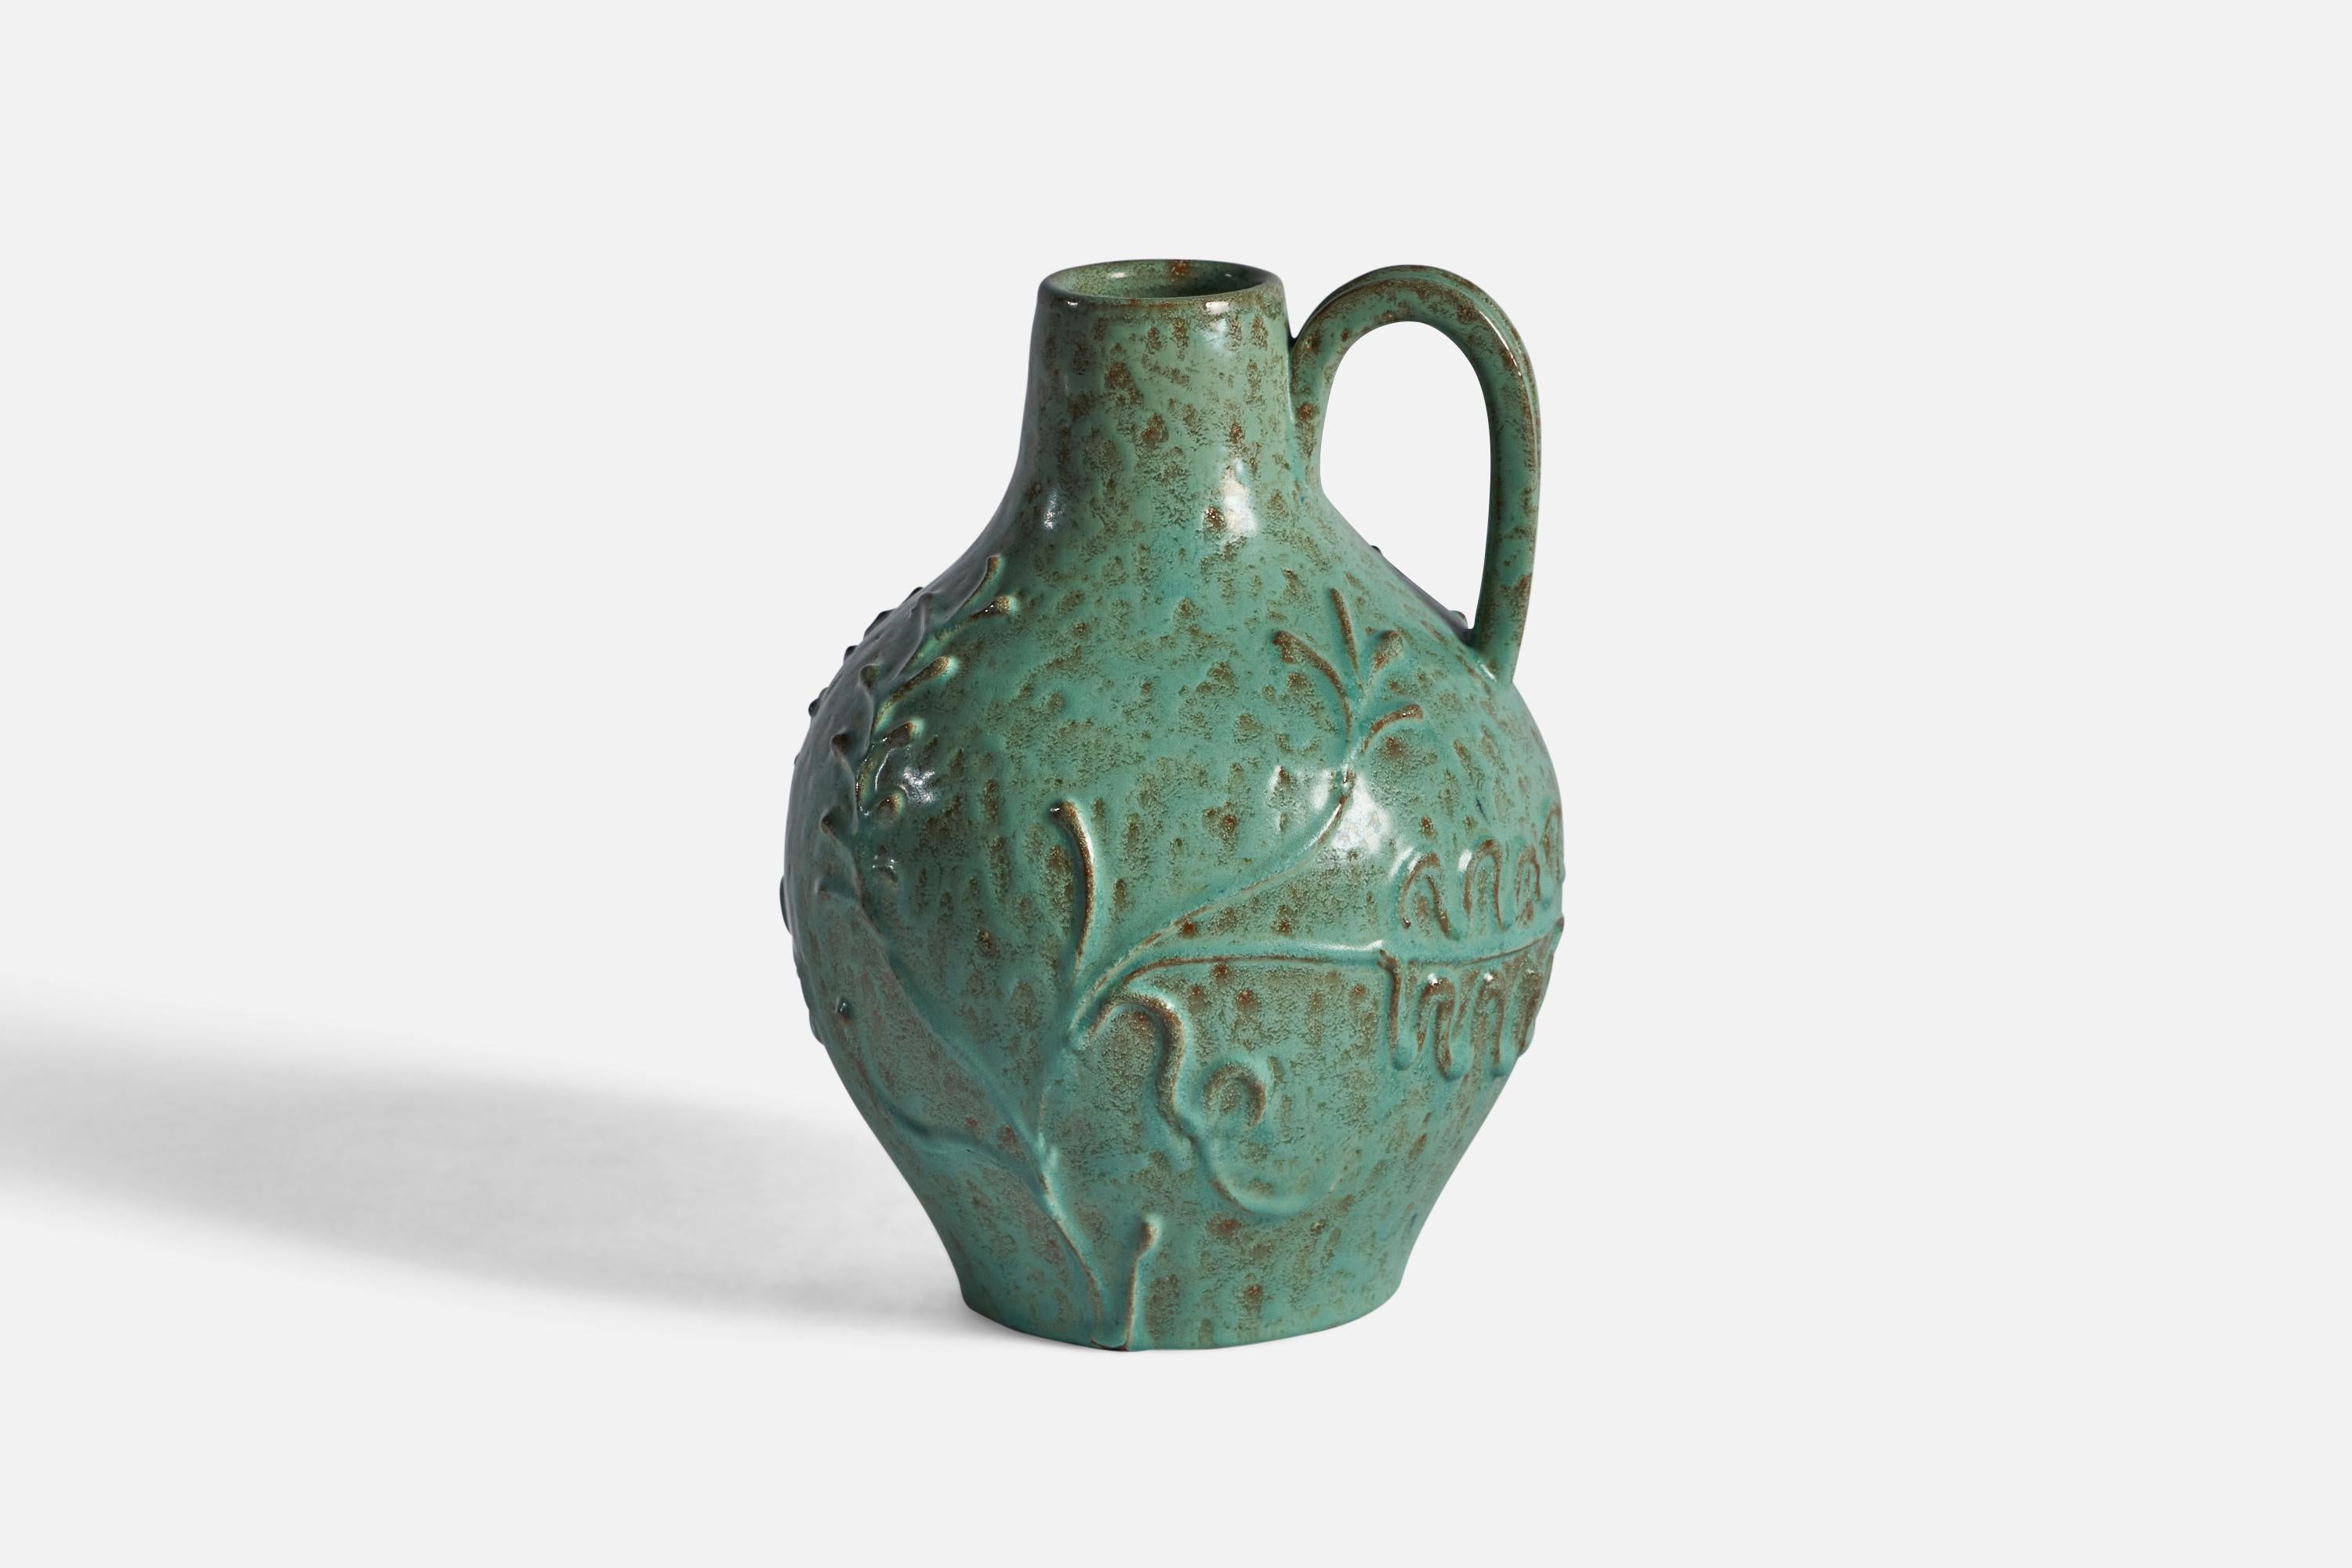 A green-glazed earthenware vase with relief decoration, designed and produced by Nittsjö, Sweden, c. 1930s.